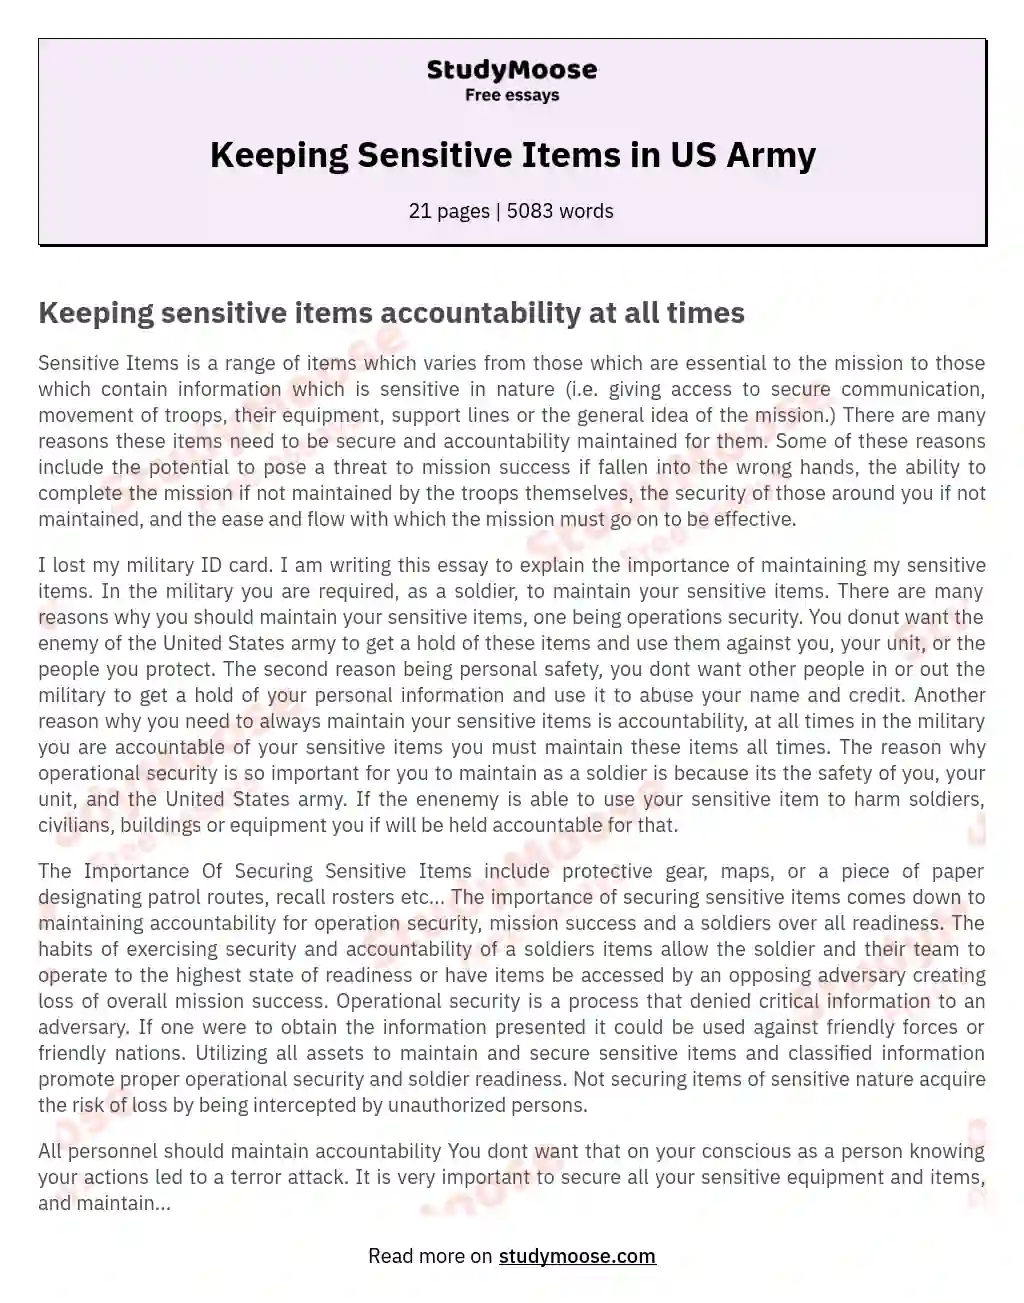 Keeping Sensitive Items in US Army essay